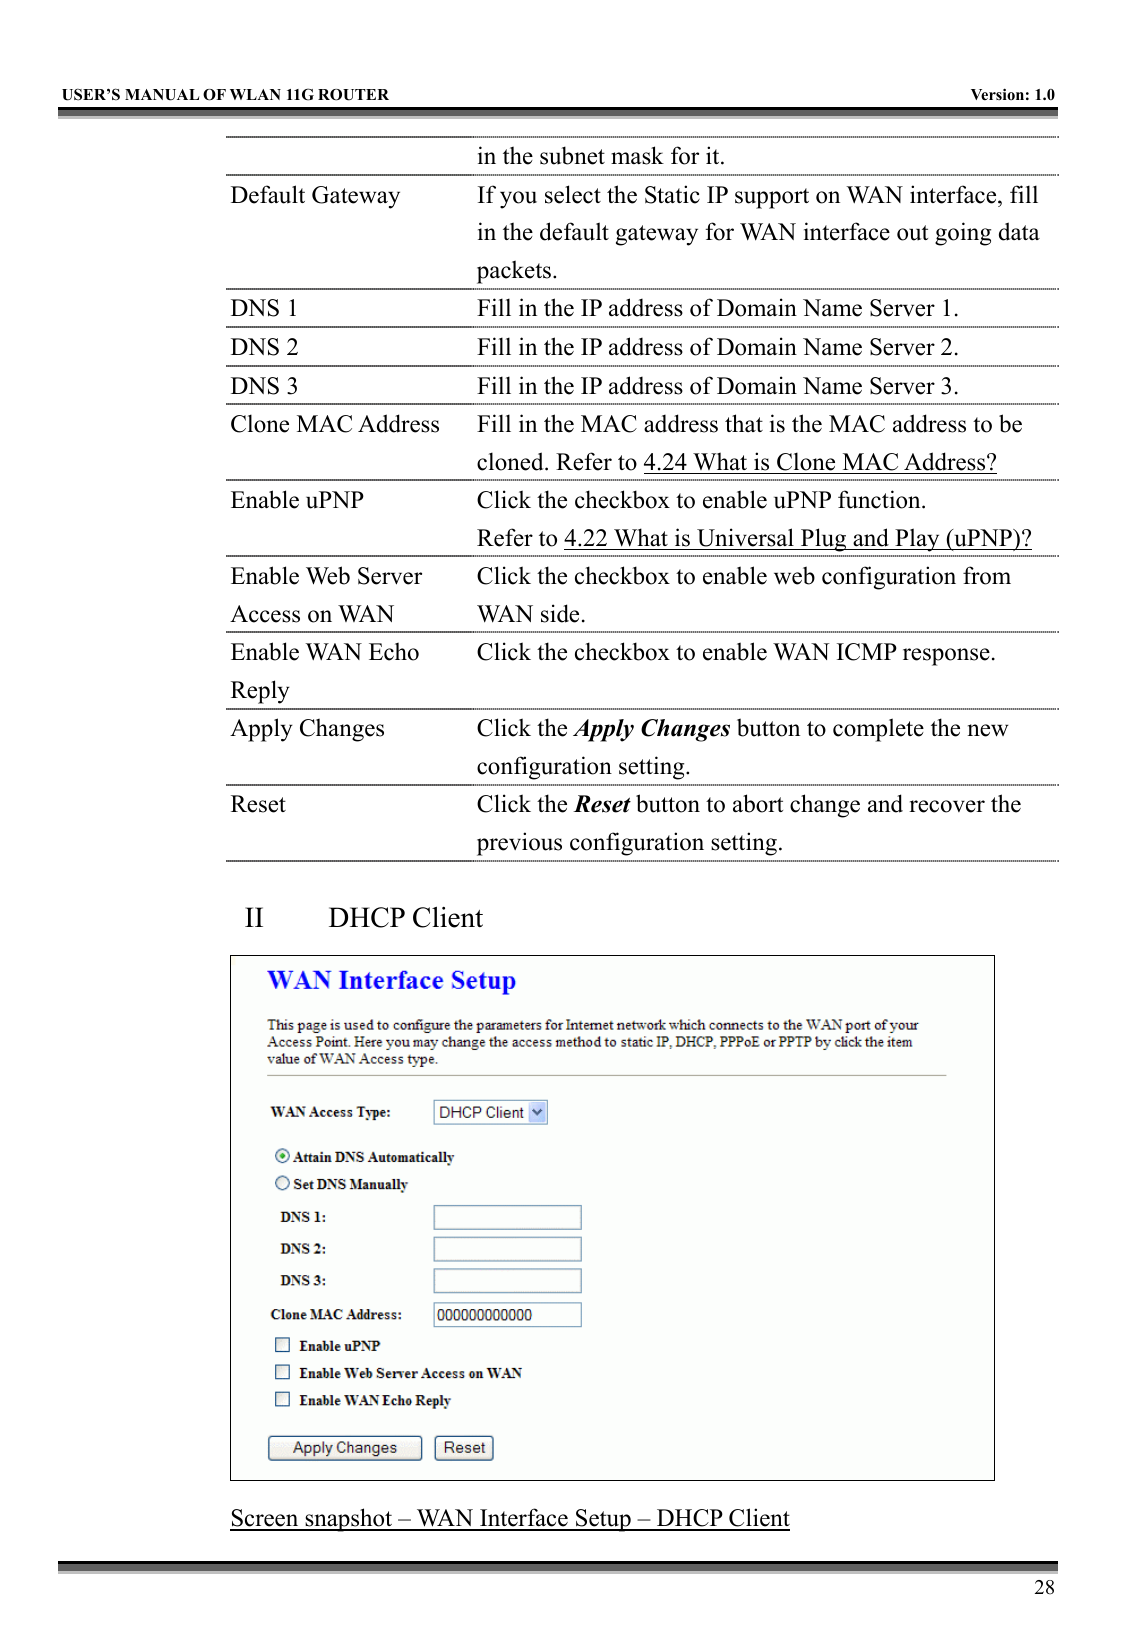   USER’S MANUAL OF WLAN 11G ROUTER    Version: 1.0     28 in the subnet mask for it. Default Gateway  If you select the Static IP support on WAN interface, fill in the default gateway for WAN interface out going data packets. DNS 1  Fill in the IP address of Domain Name Server 1. DNS 2  Fill in the IP address of Domain Name Server 2. DNS 3  Fill in the IP address of Domain Name Server 3. Clone MAC Address  Fill in the MAC address that is the MAC address to be cloned. Refer to 4.24 What is Clone MAC Address? Enable uPNP  Click the checkbox to enable uPNP function. Refer to 4.22 What is Universal Plug and Play (uPNP)? Enable Web Server Access on WAN Click the checkbox to enable web configuration from WAN side. Enable WAN Echo Reply Click the checkbox to enable WAN ICMP response. Apply Changes  Click the Apply Changes button to complete the new configuration setting. Reset Click the Reset button to abort change and recover the previous configuration setting.  II  DHCP Client  Screen snapshot – WAN Interface Setup – DHCP Client 